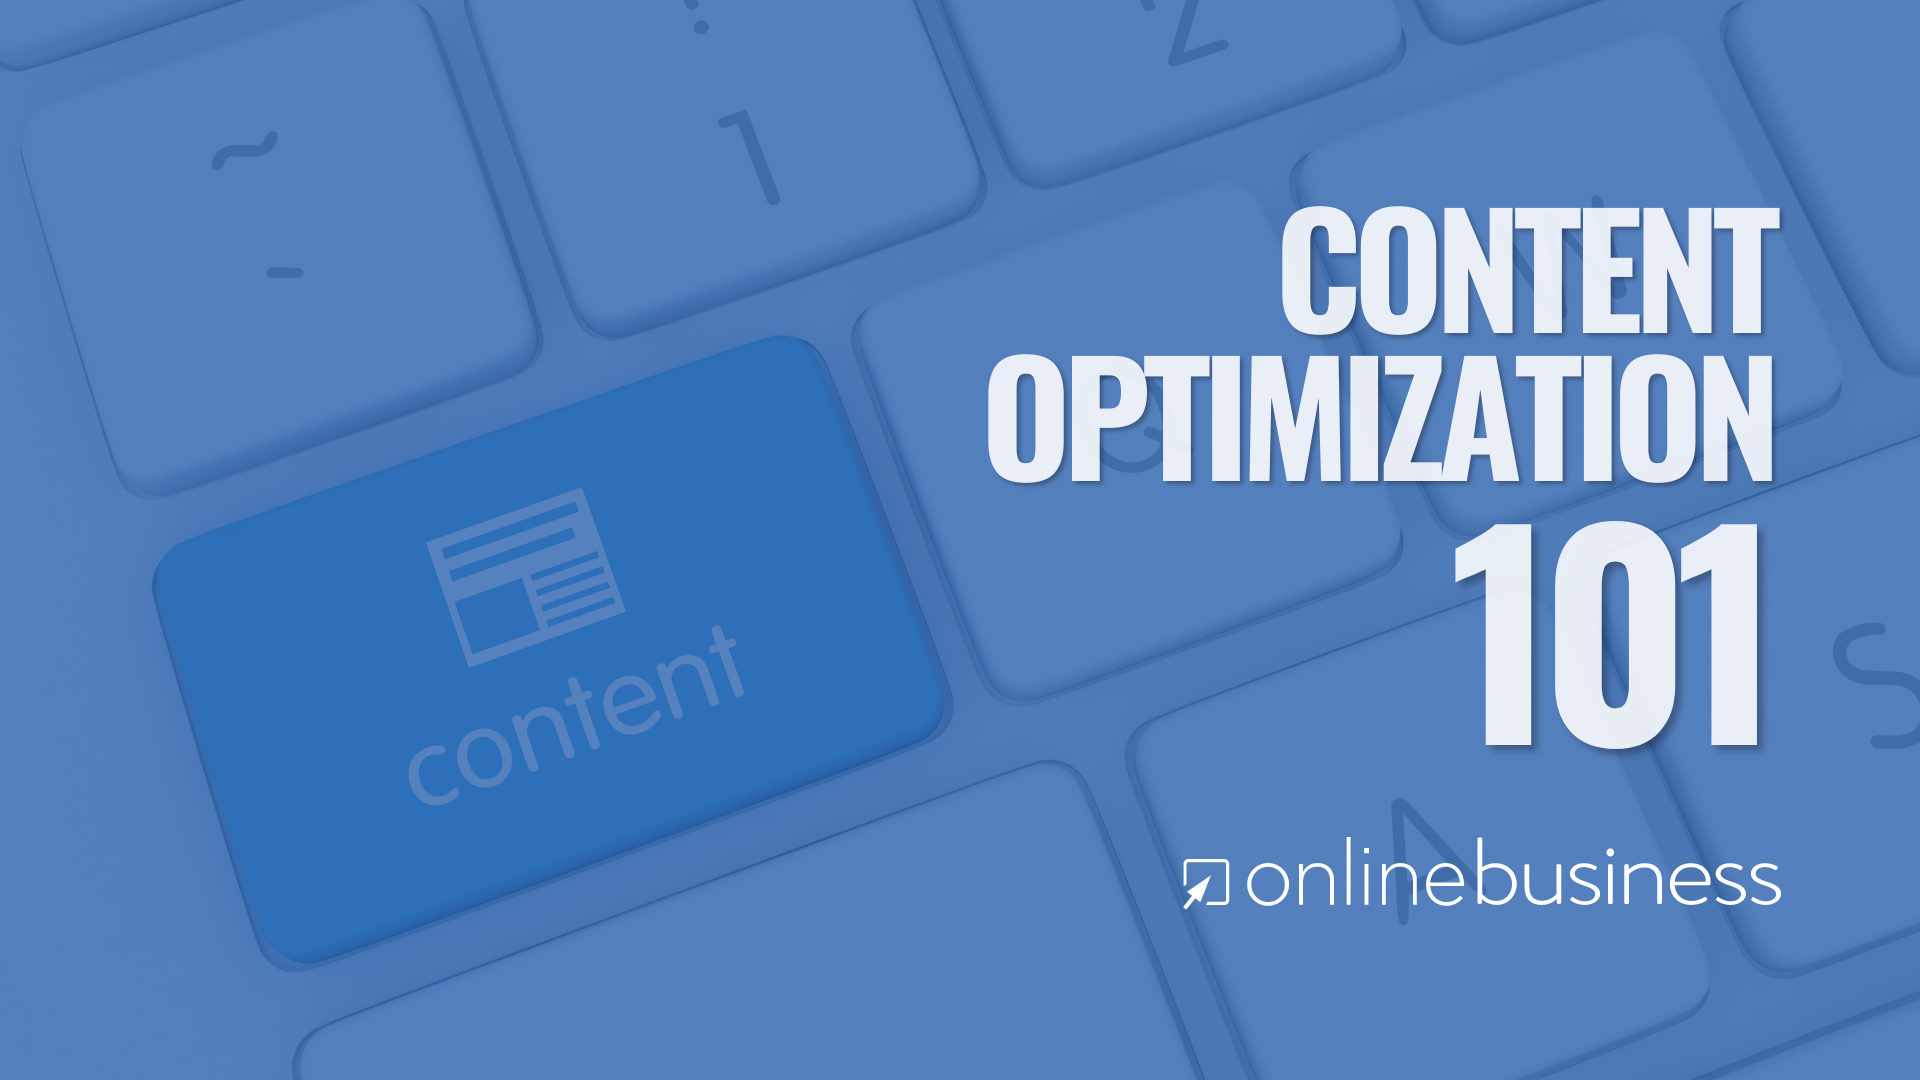 OnlineBusiness.com Educates Its Readers On Content Optimization